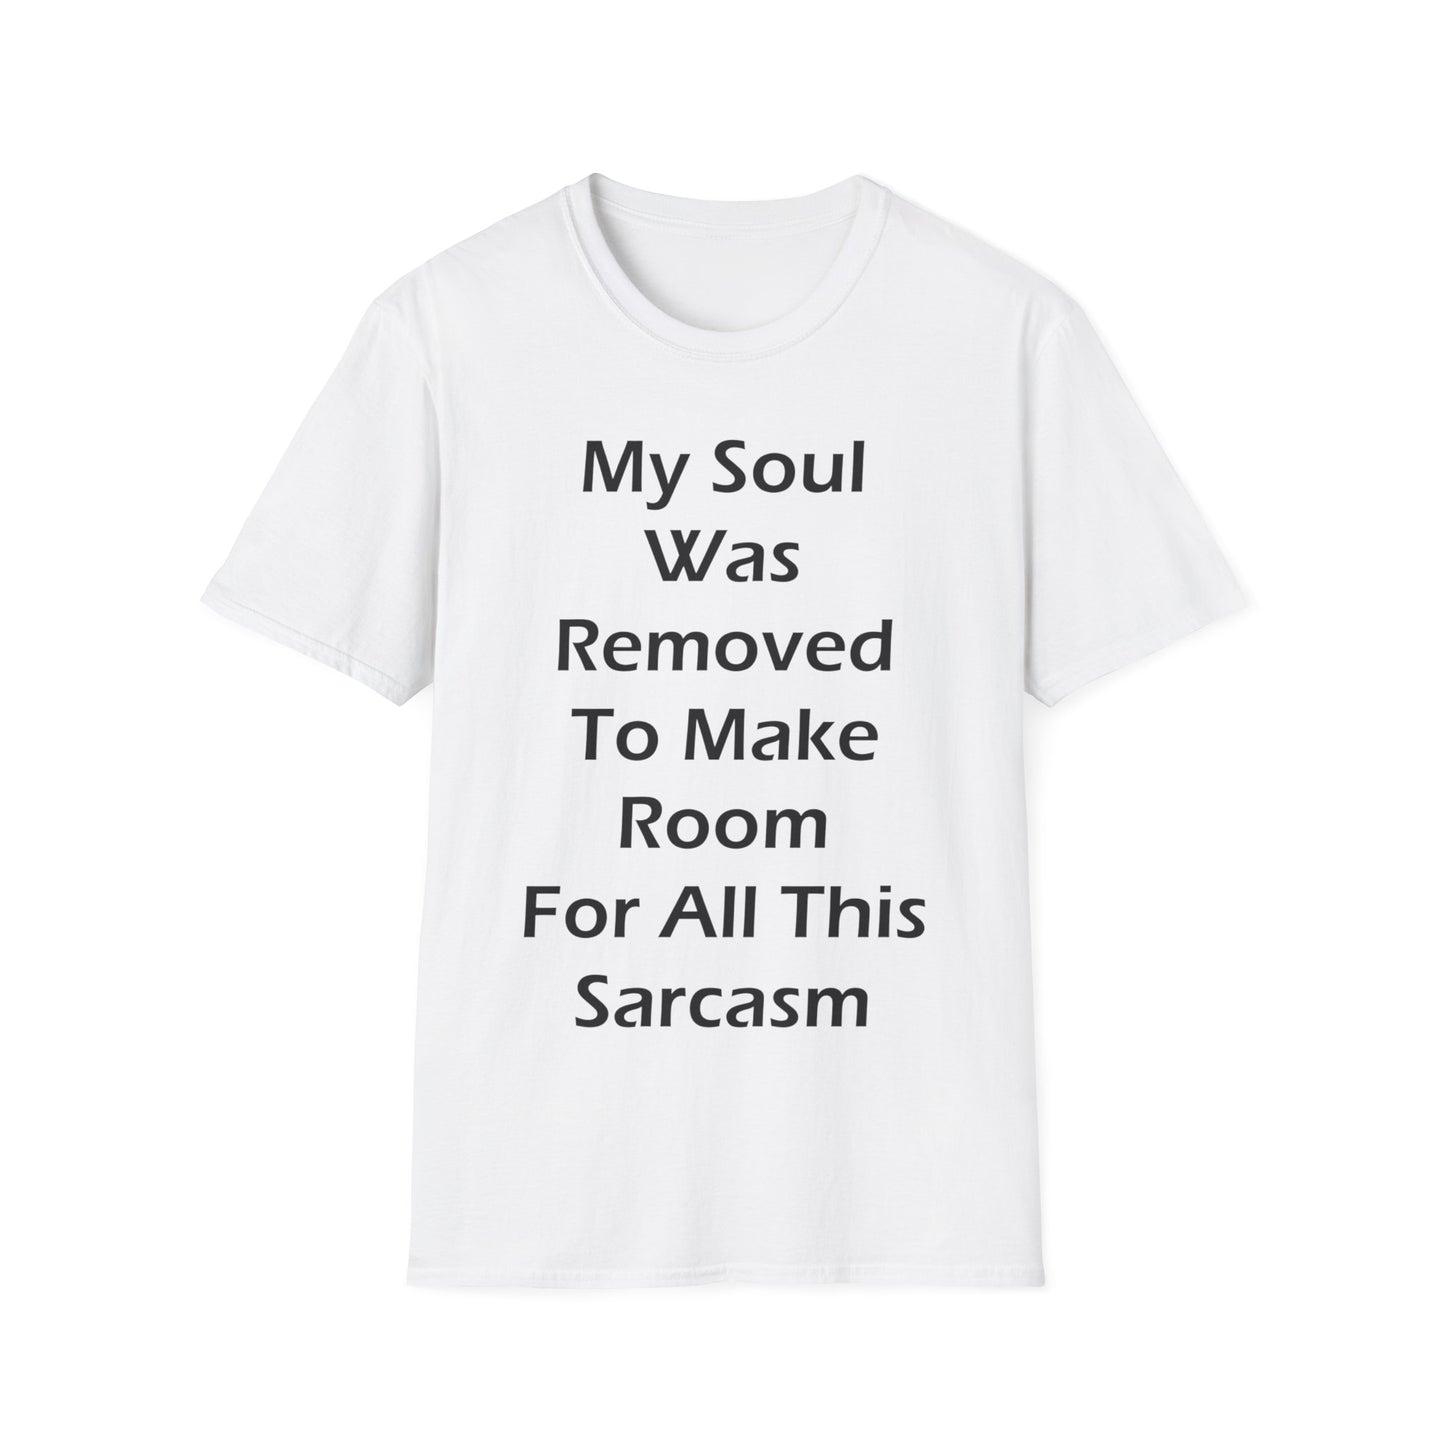 My Soul Was Removed to Make Room For Sarcasm T-Shirt